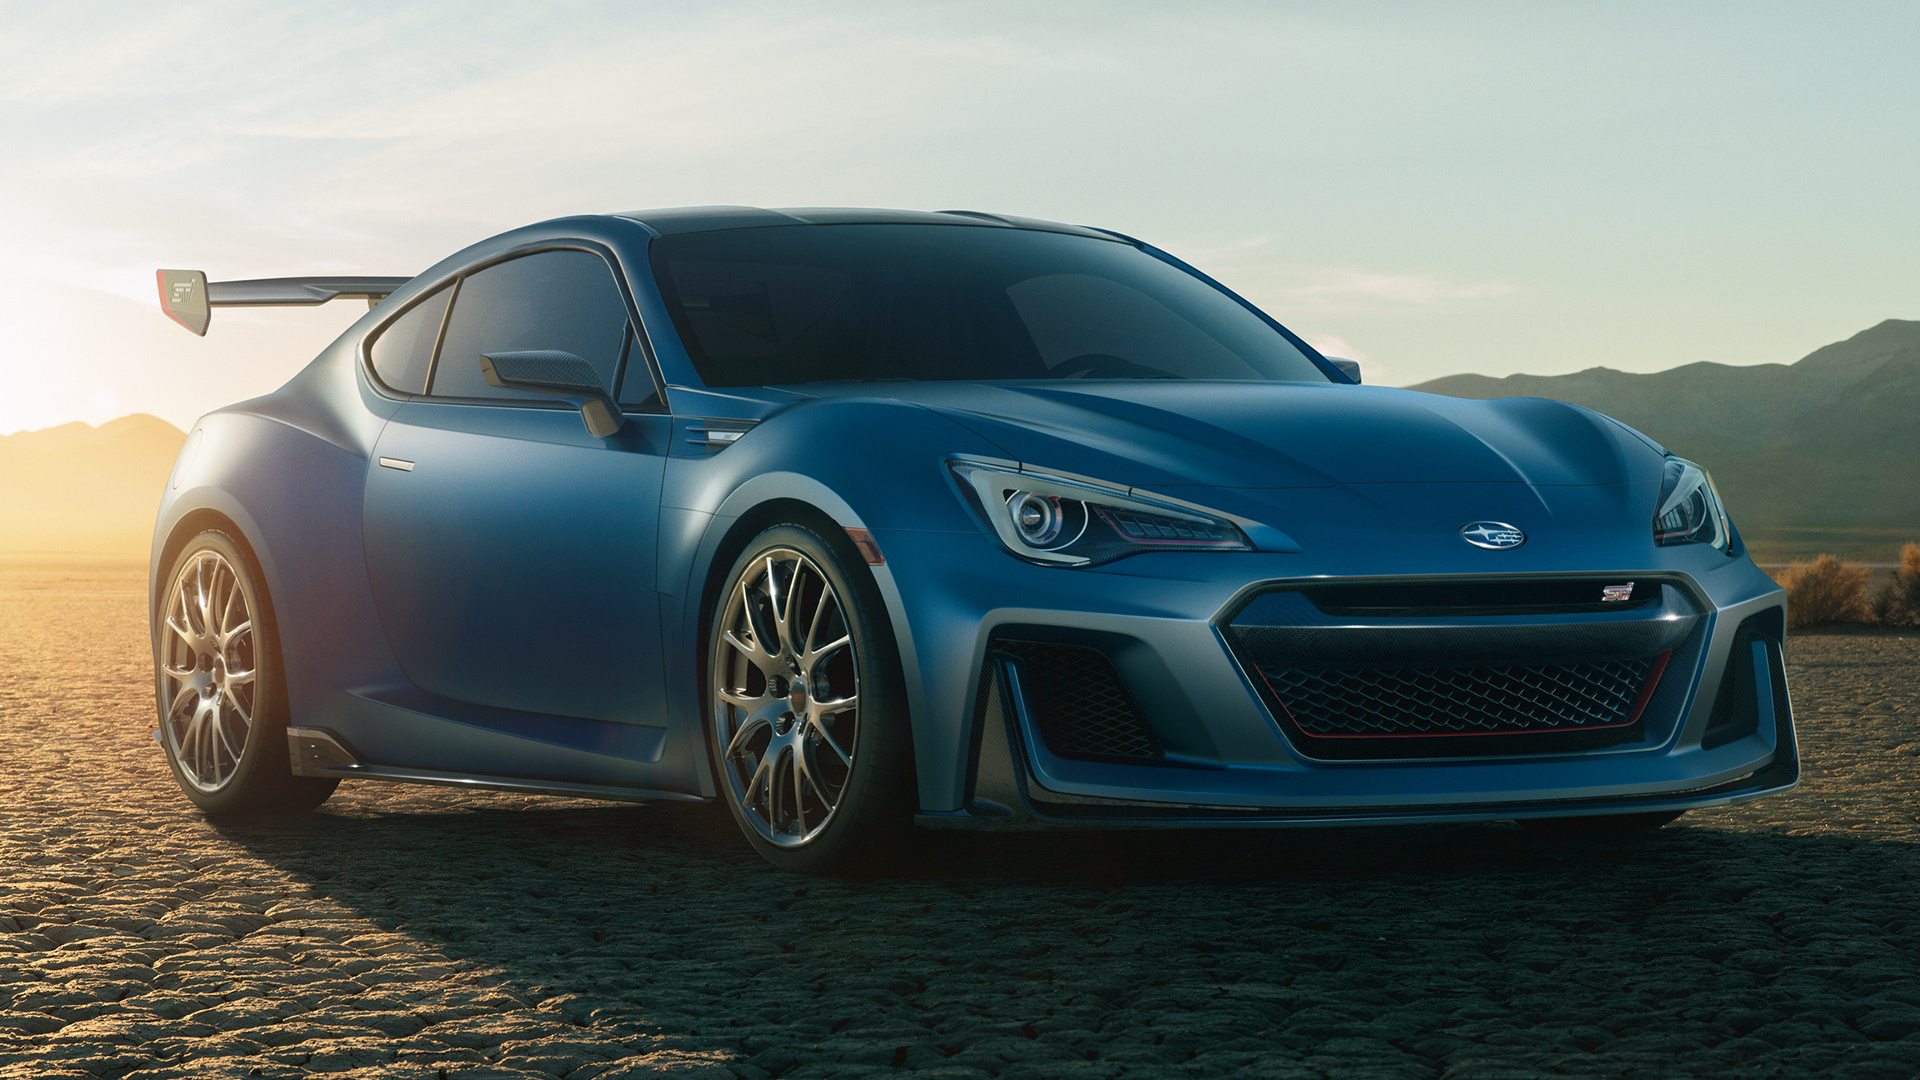 2015 Subaru Brz Sti Performance Concept Wallpapers And Hd Images